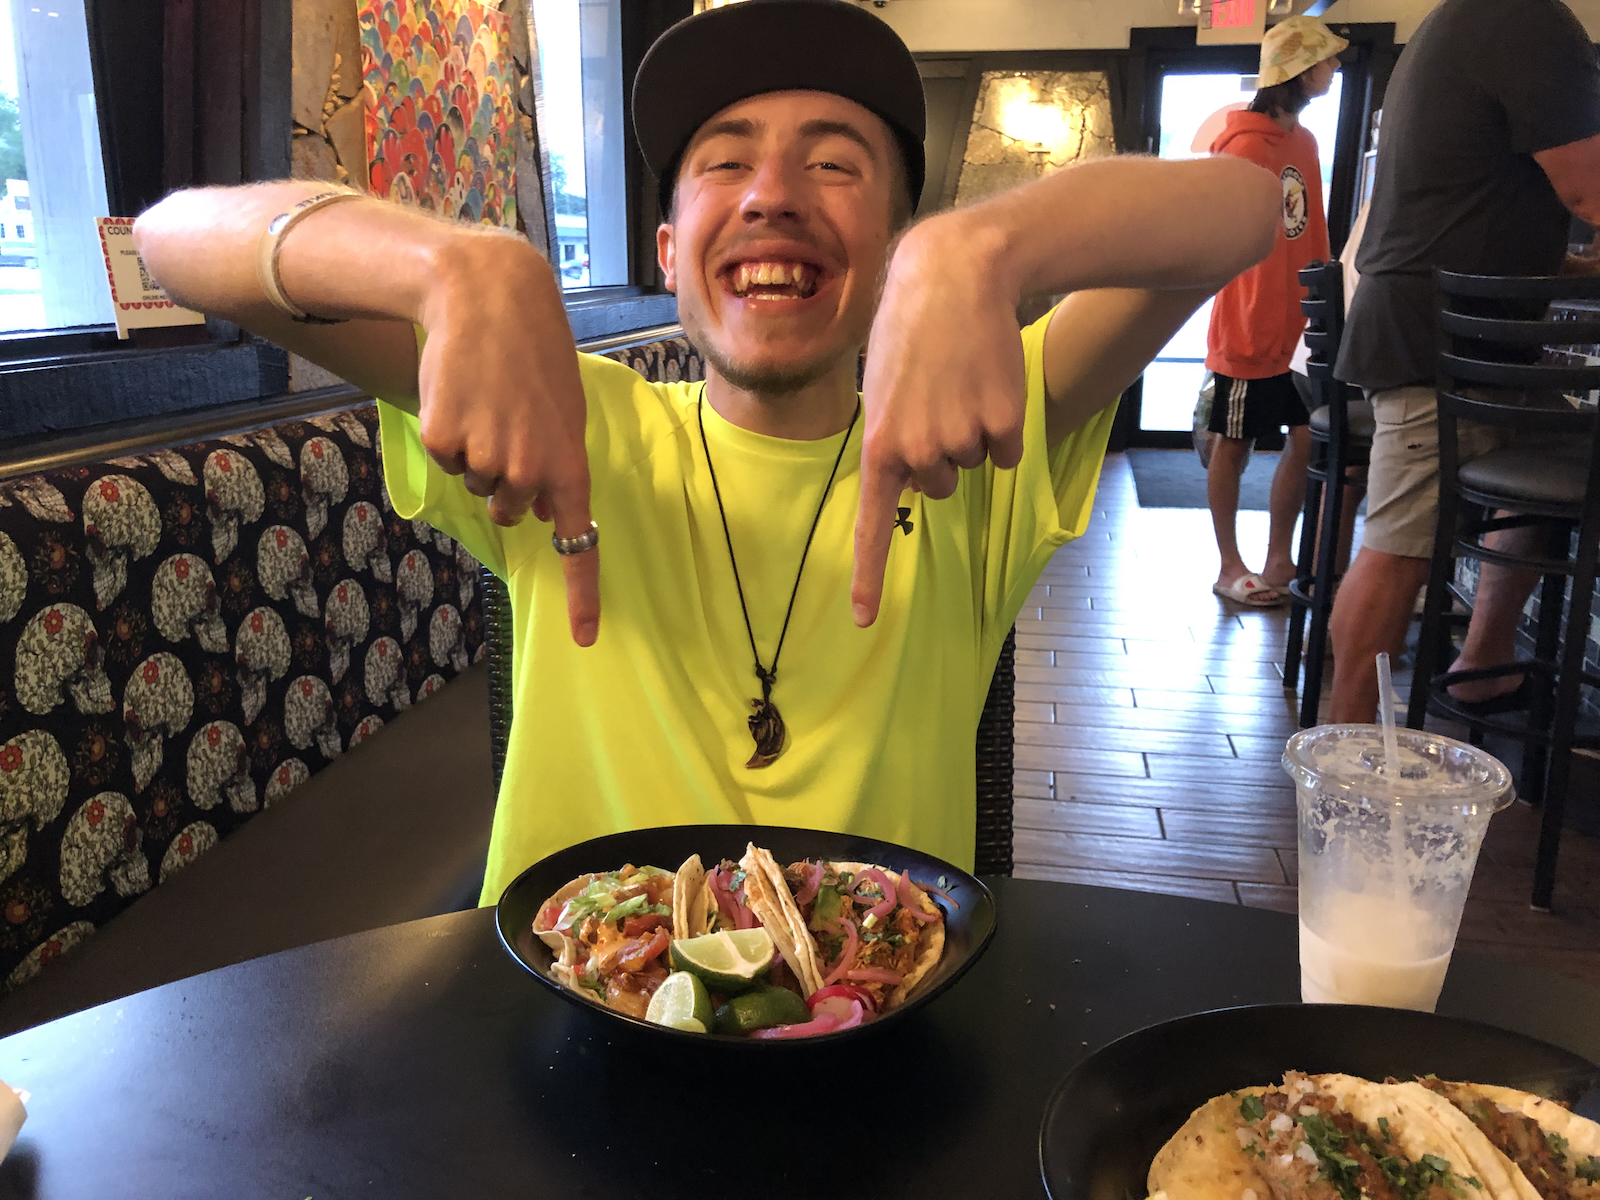 Dominic with his tacos